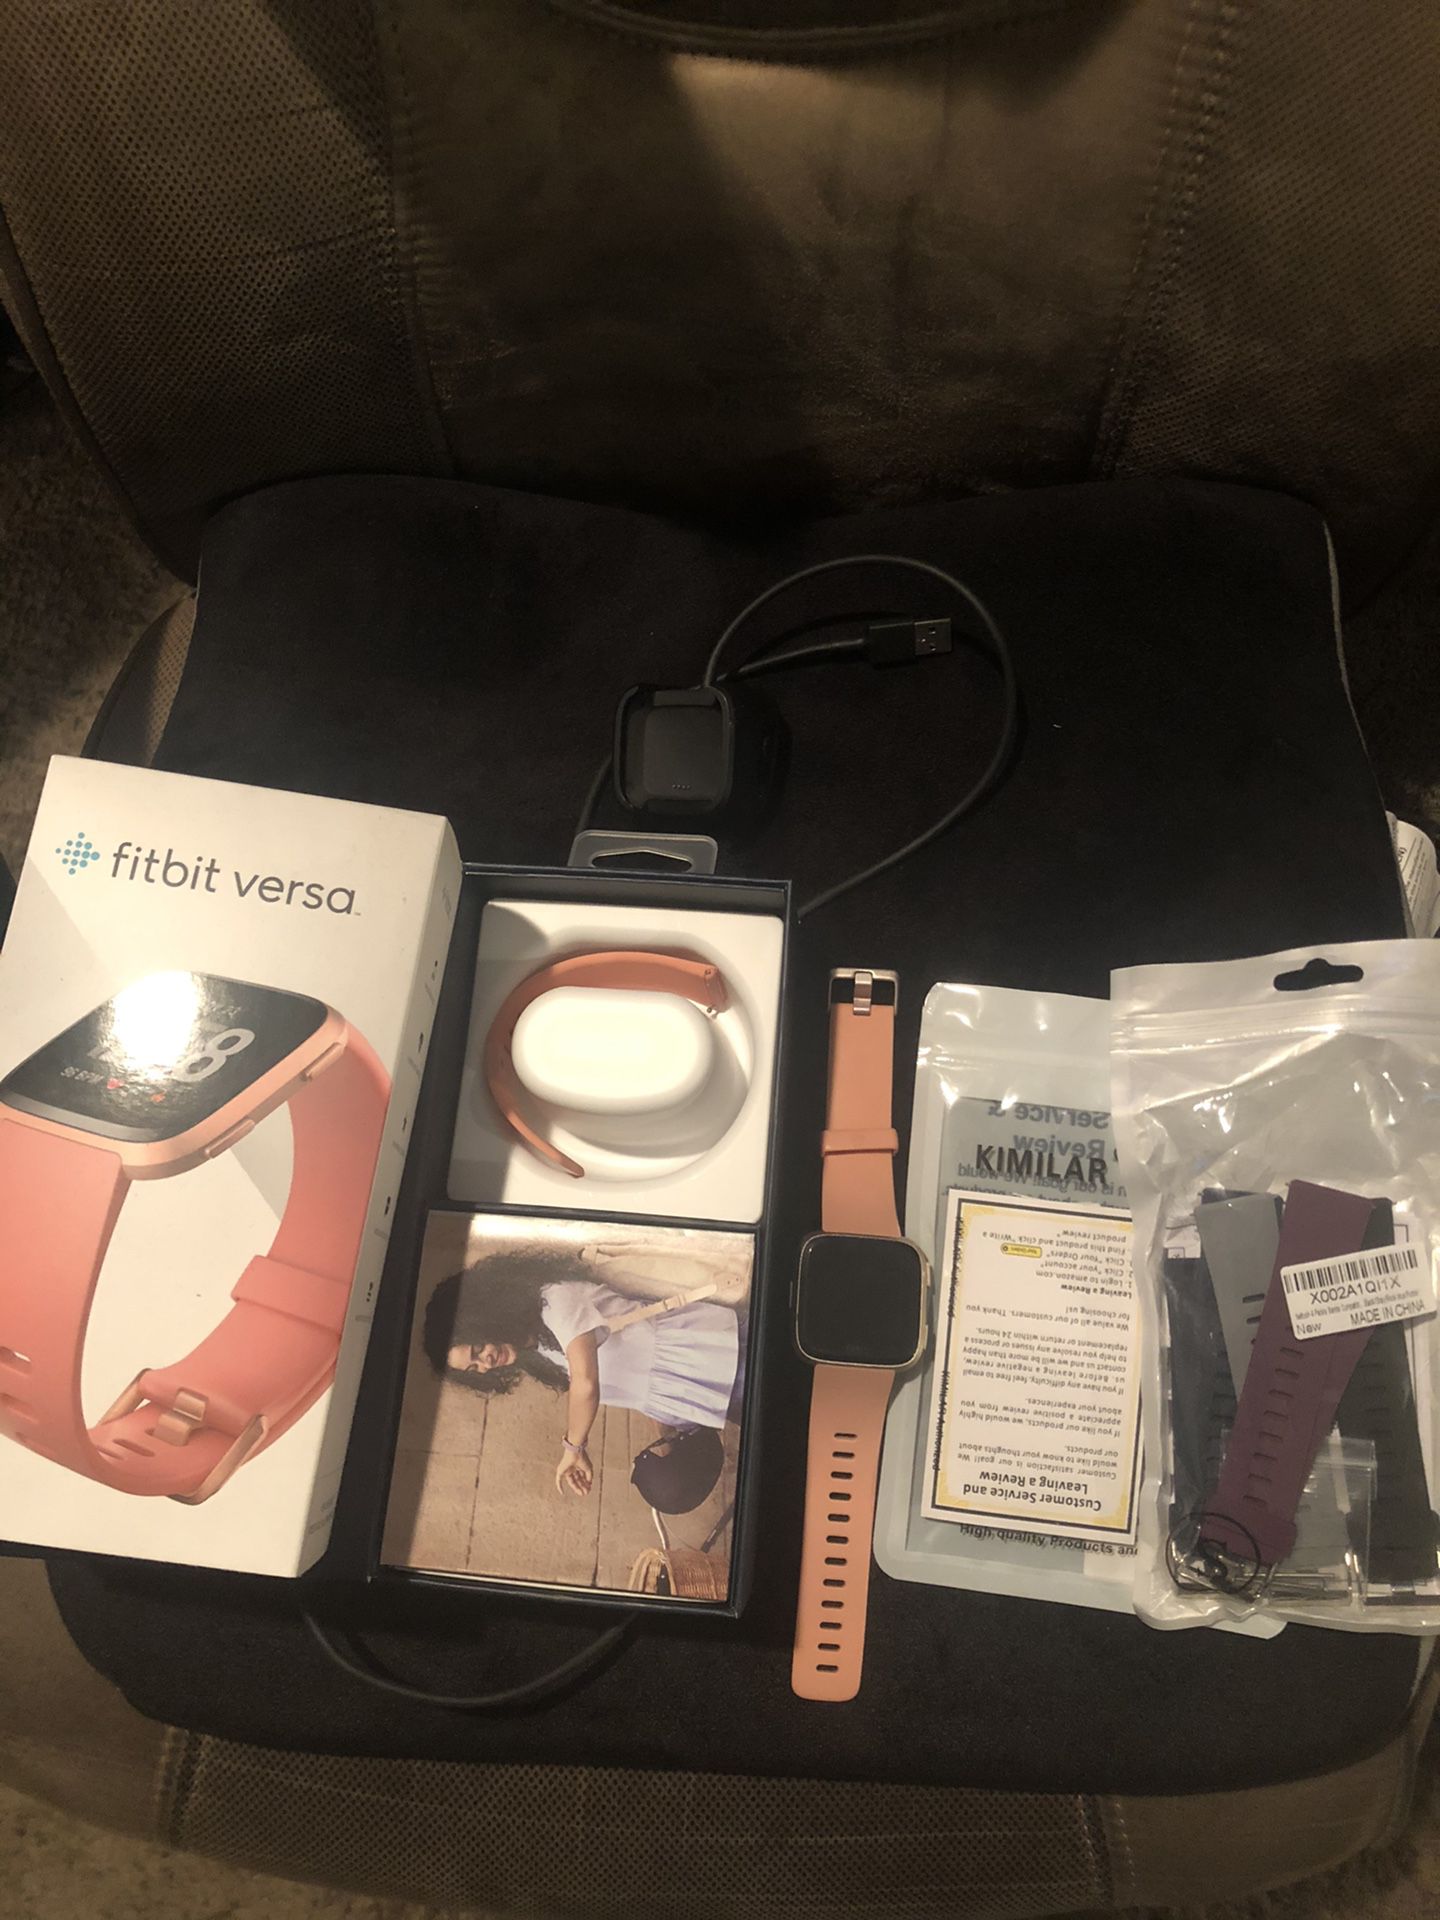 Fitbit Versa with box and accessories